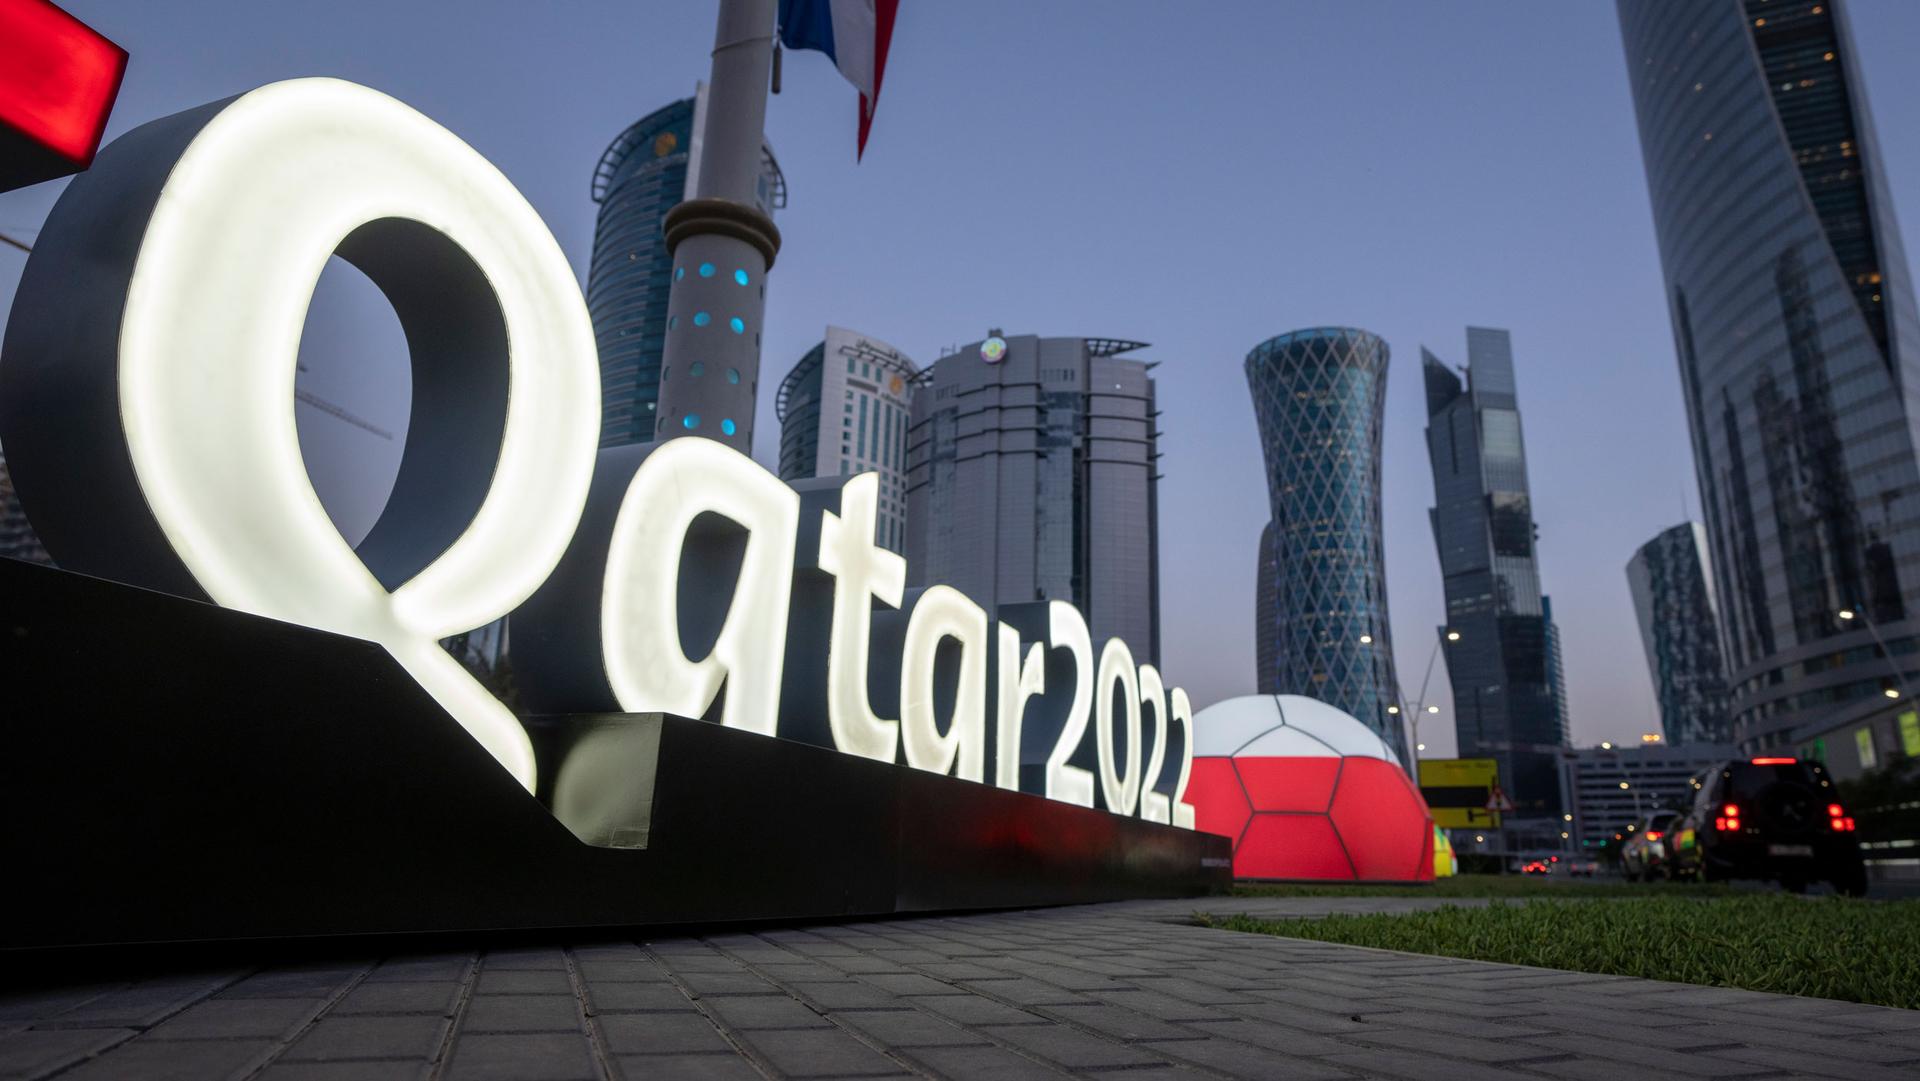 Branding is displayed near the Doha Exhibition and Convention Center, in Doha, Qatar, March 31, 2022.